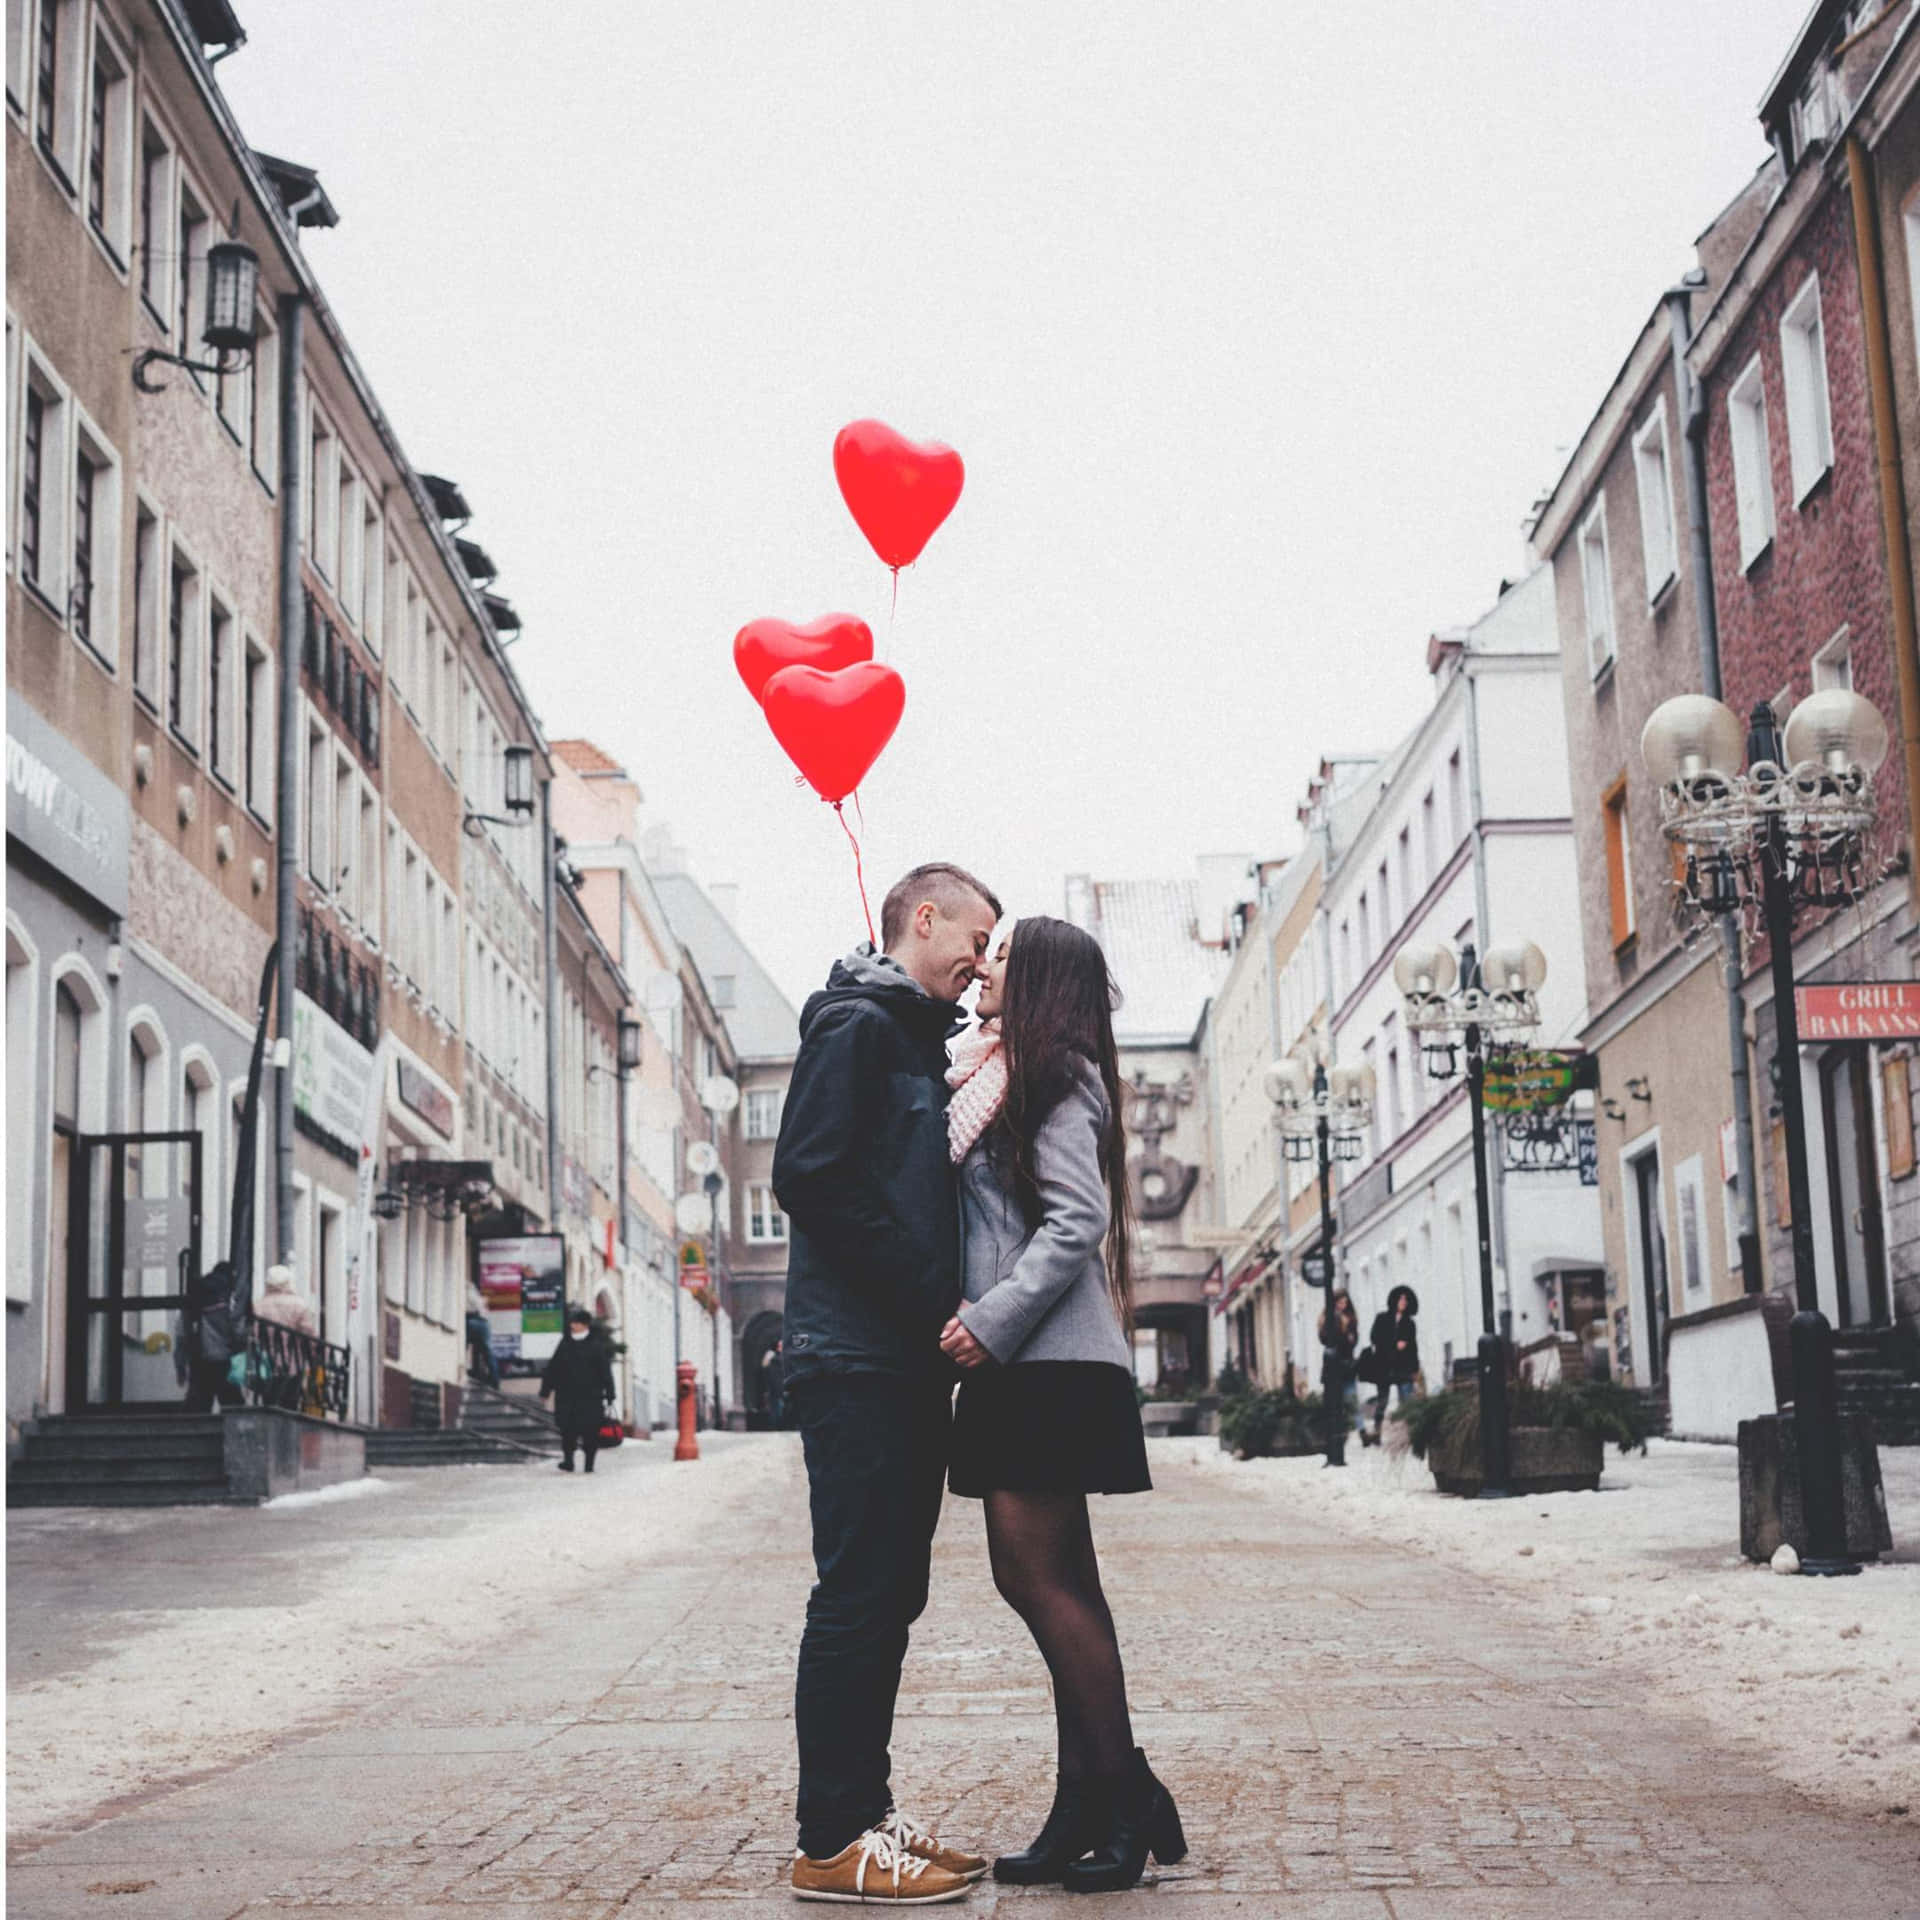 Cute Relationship Heart Balloons City Picture